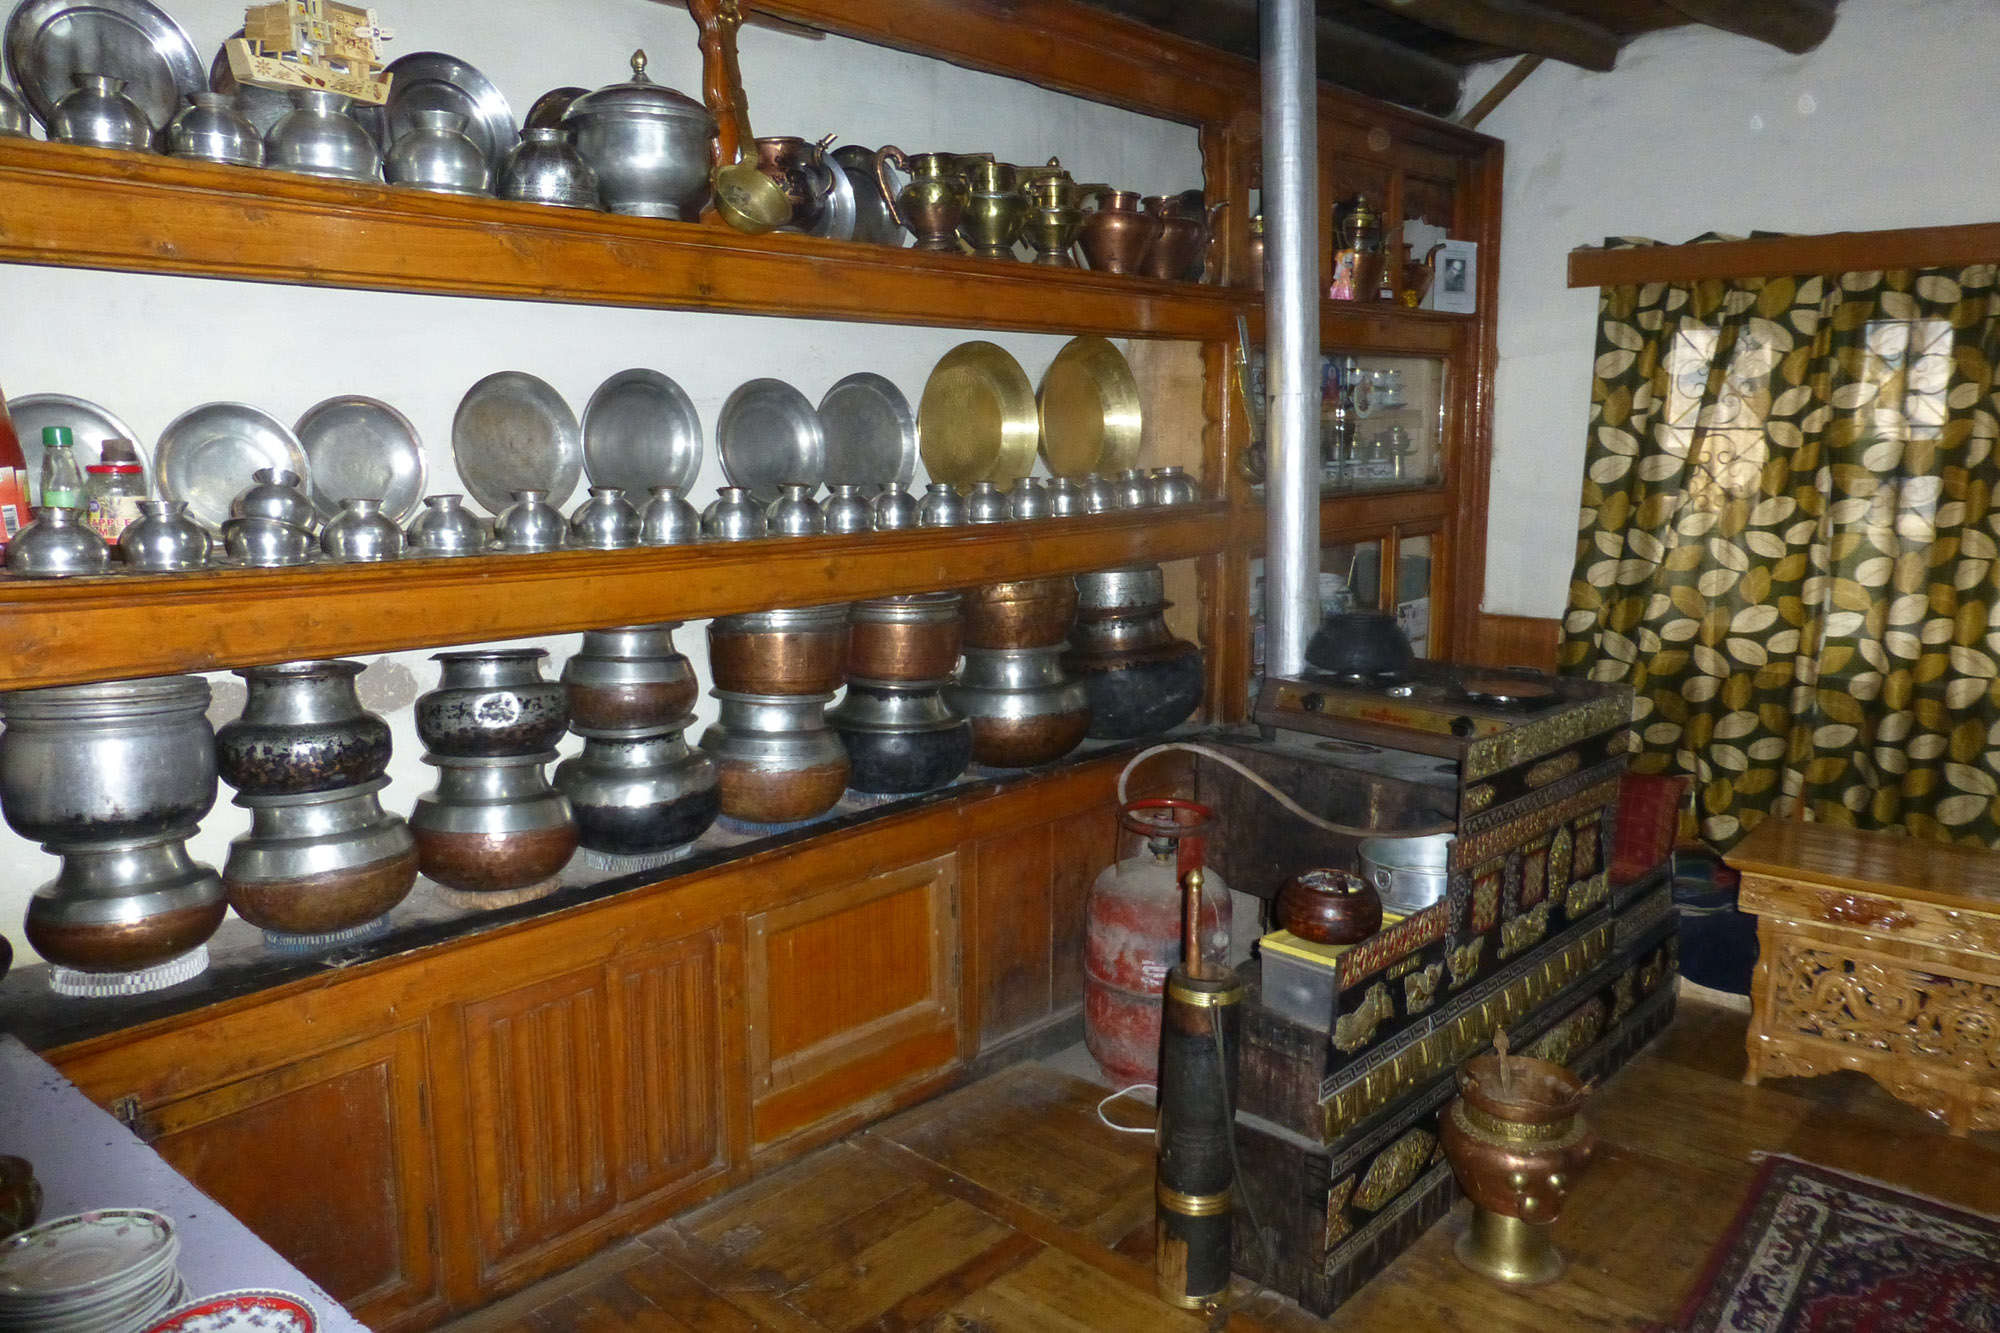 Tsewang's kitchen, with the dongmo in the foreground.